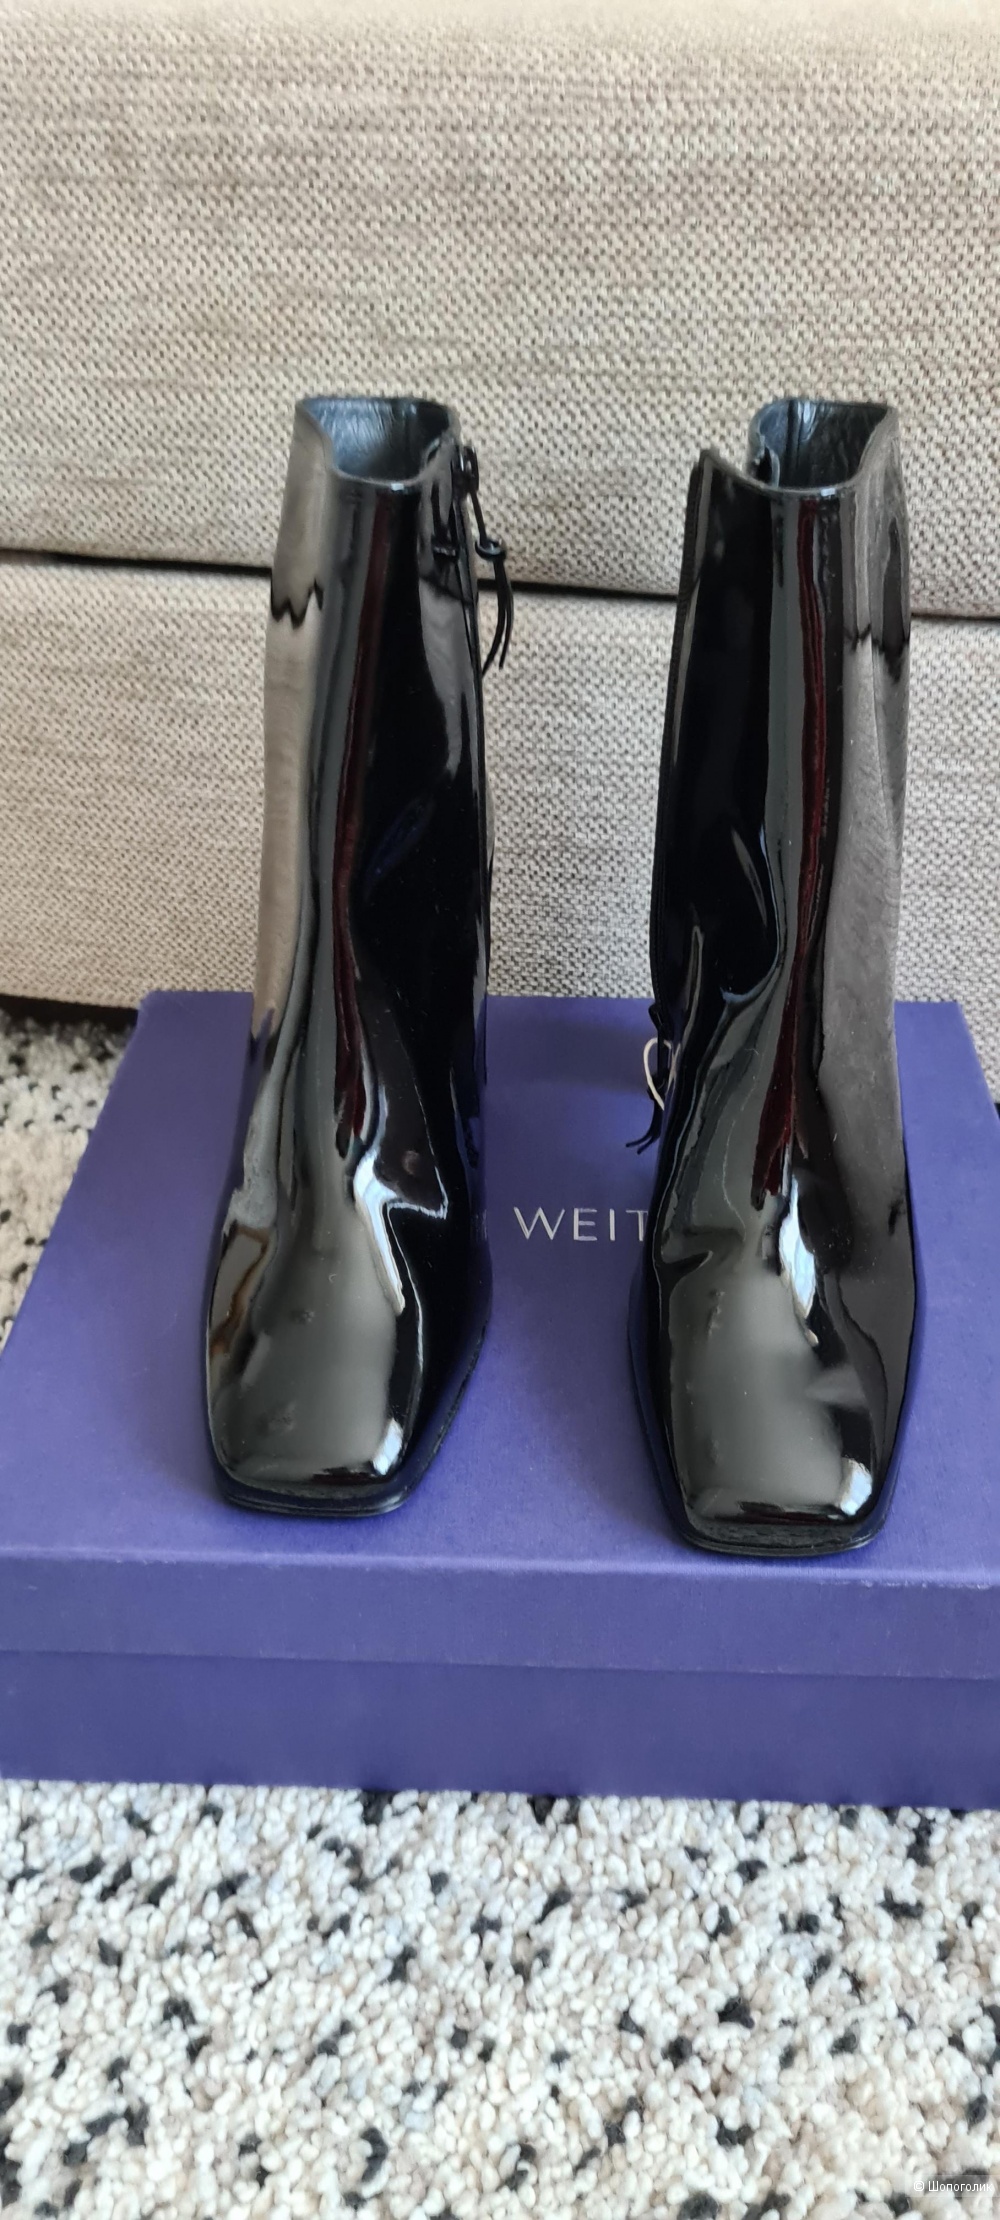 STUART WEITZMAN Patent-leather ankle boots,39